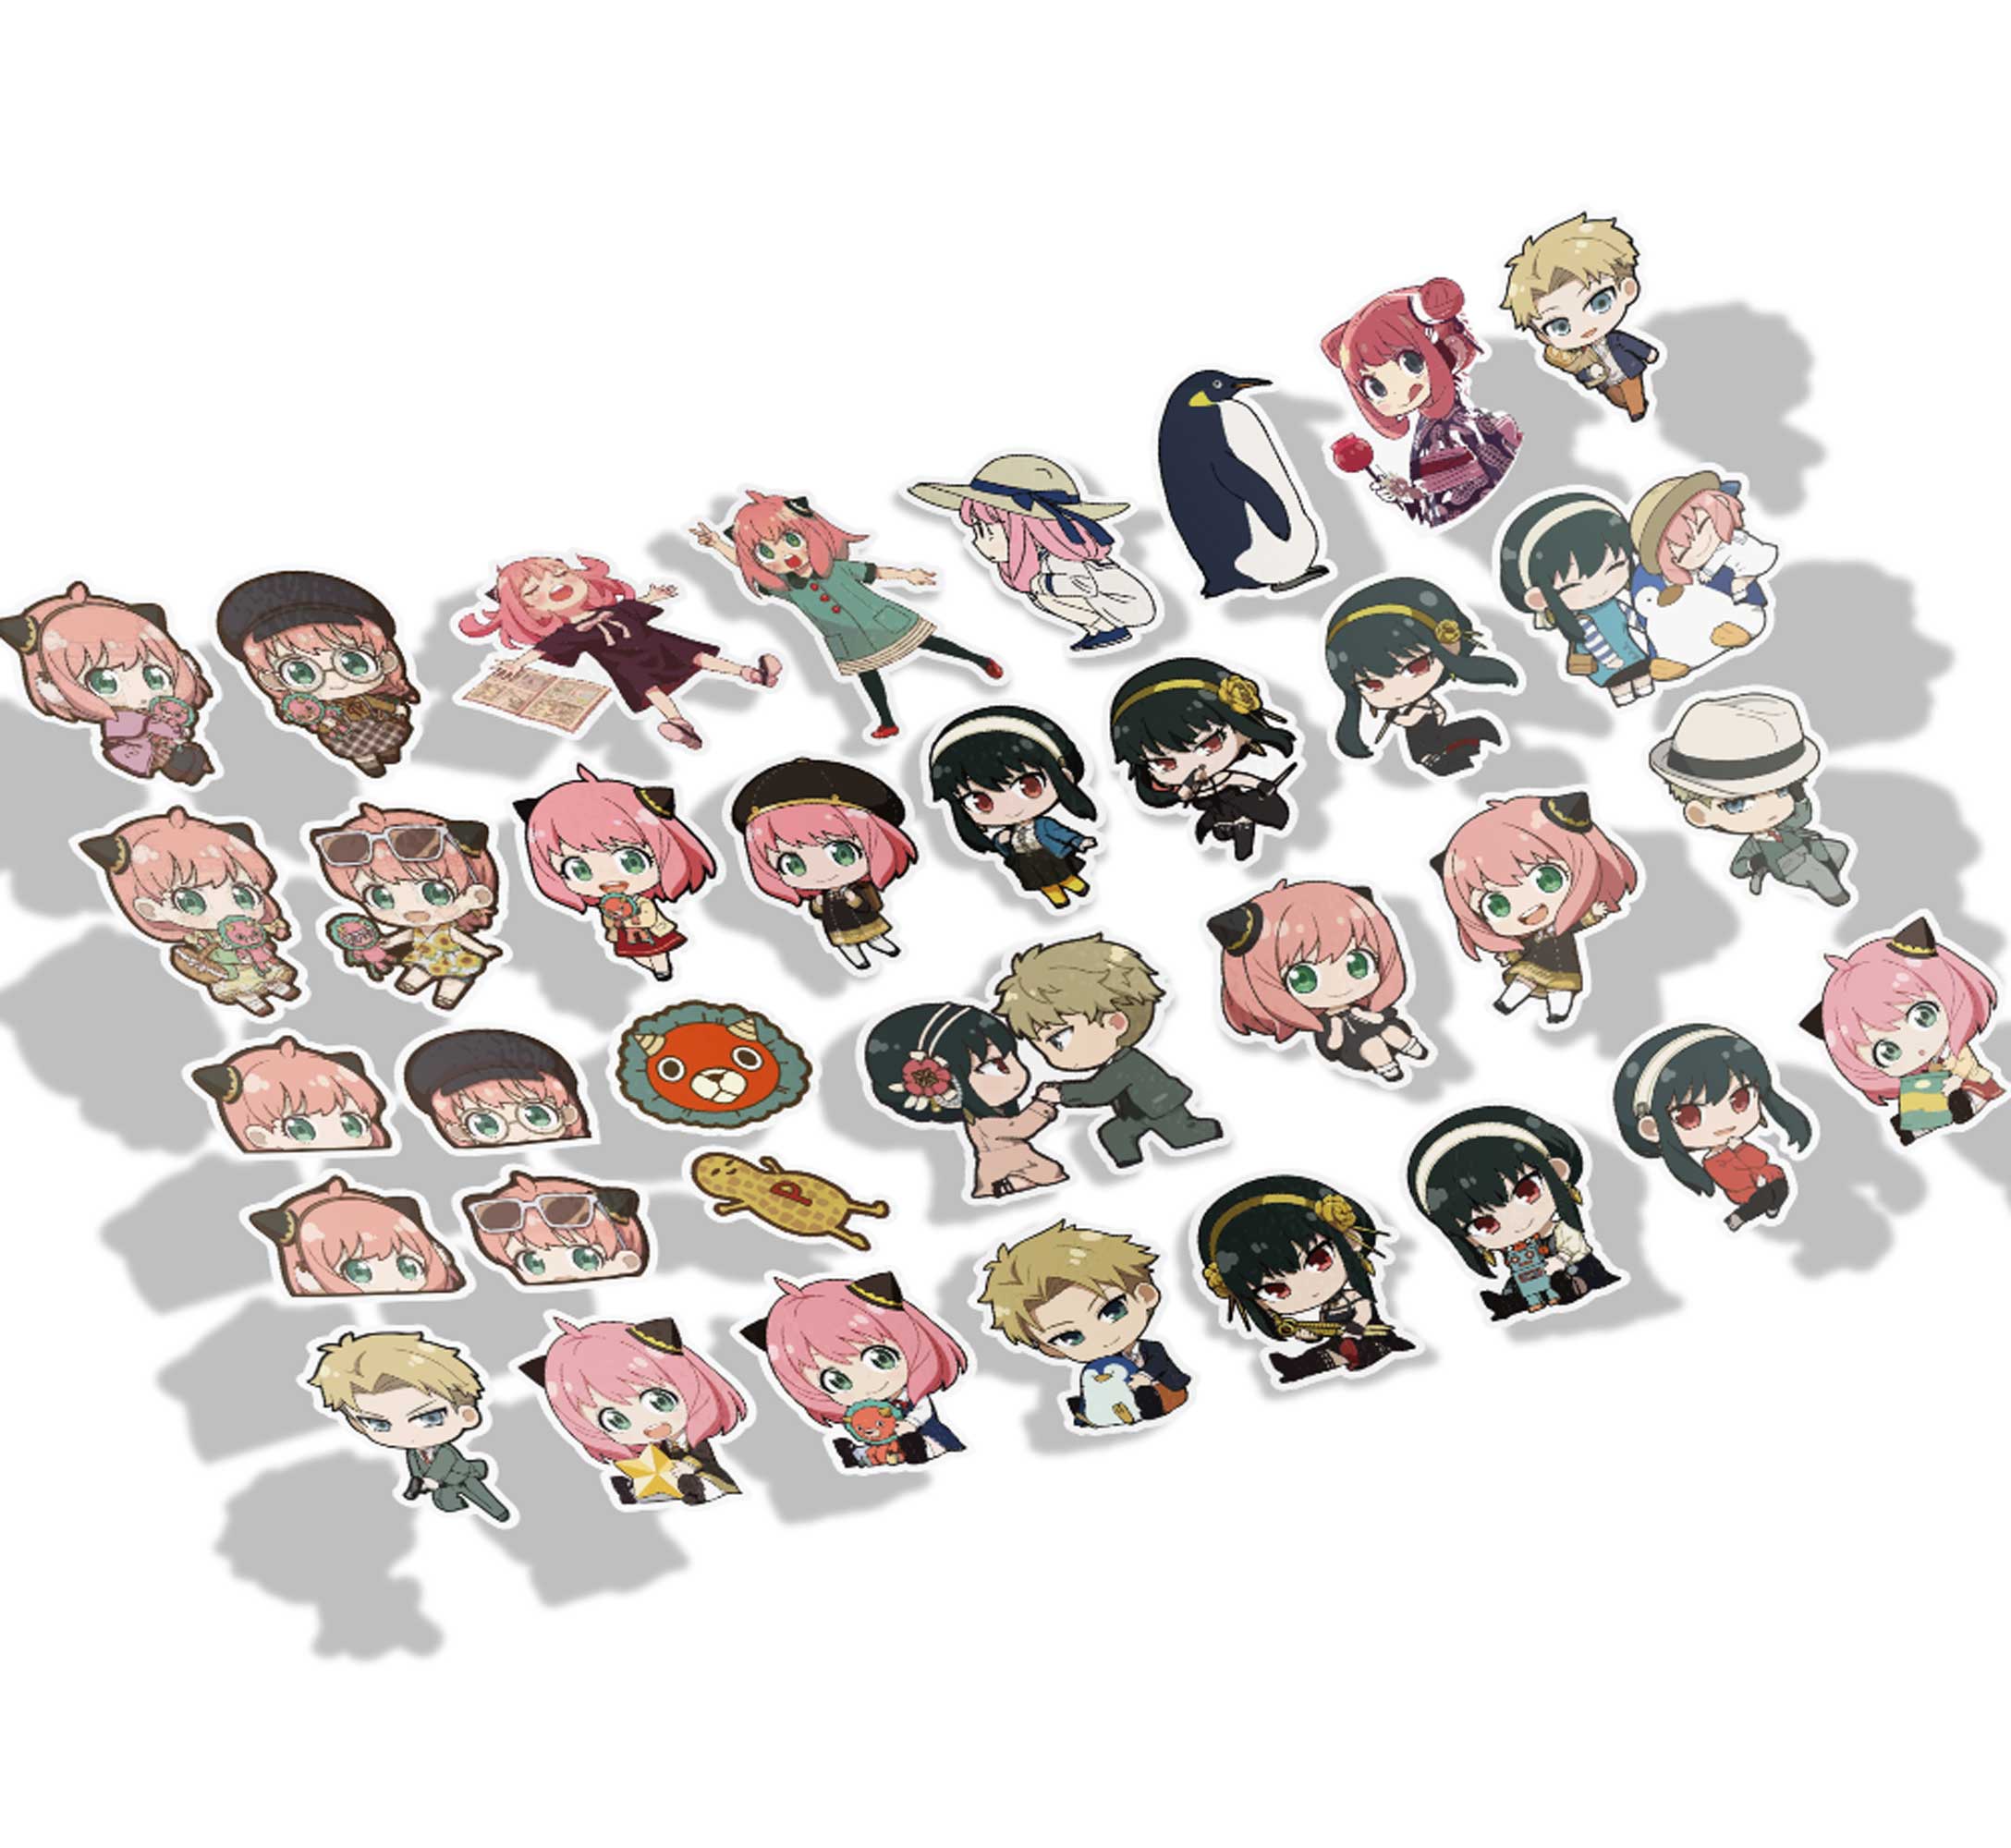 Direct Factory Vinyl Clear Halloween Sticker Sheet Travel Luggage One Piece Anime  Stickers  China One Piece Anime Stickers and Travel Luggage Stickers price   MadeinChinacom